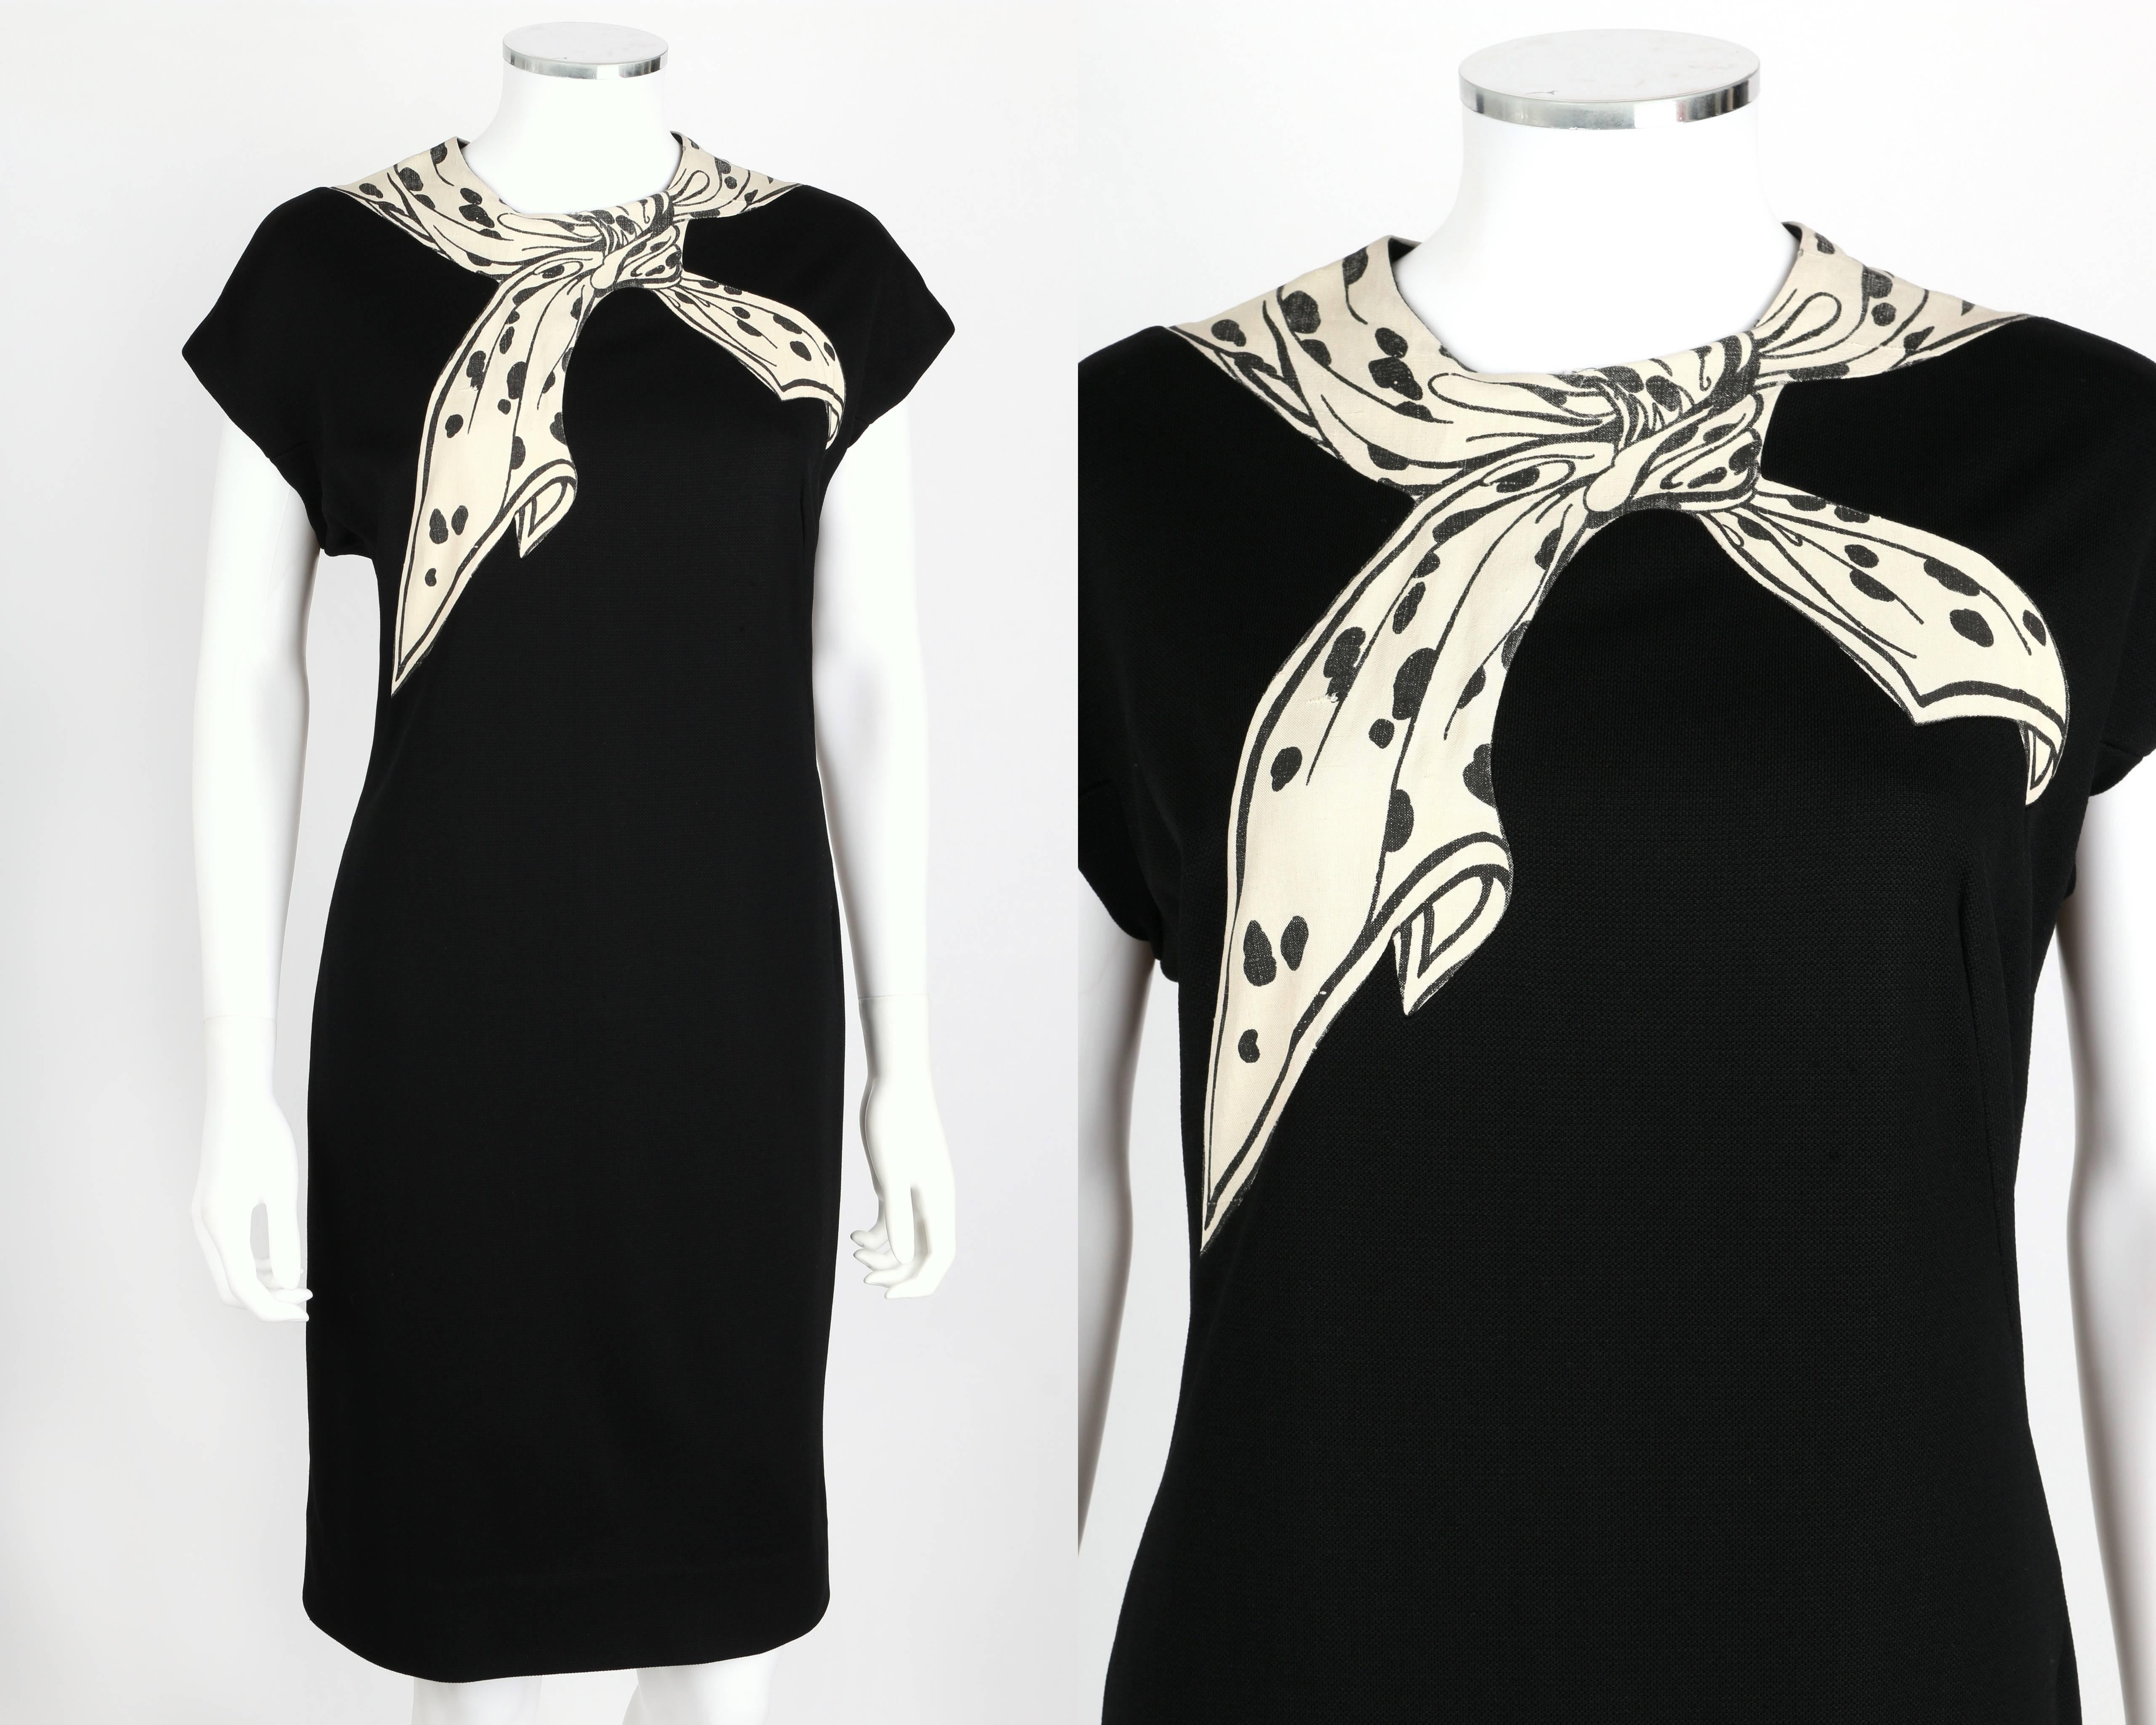 Vintage Sydney North c.1960's black knit shift dress. Ivory and black polka dot trompe l'oeil scarf painted on silk inset around scoop neckline. Extended shoulders. Center back invisible zipper with hook and eye closure at top. Partial lining